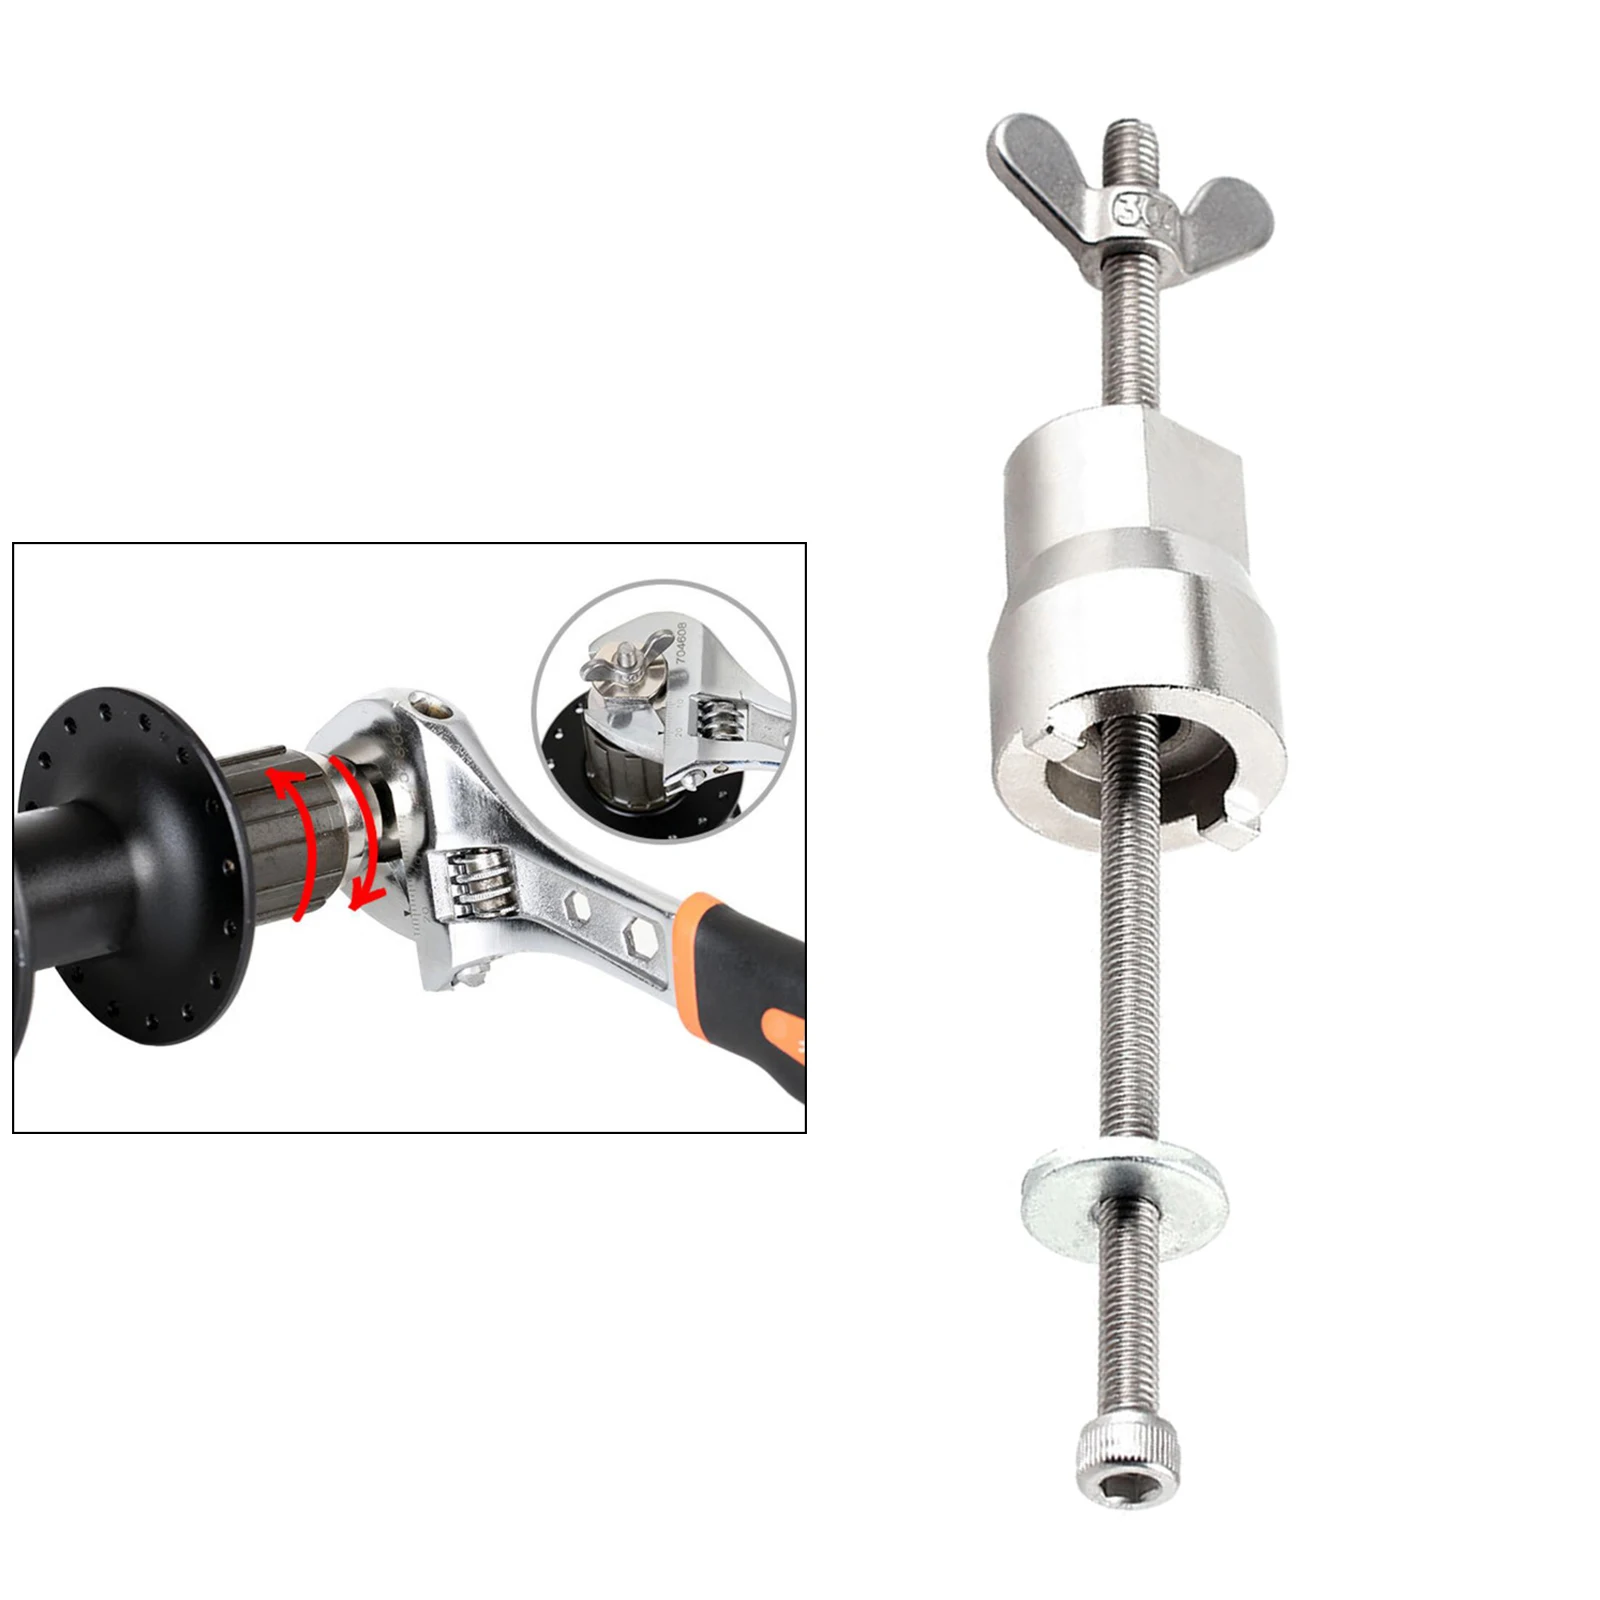 Portable Bicycle Freehubs Body Remove Install Tool Solid Anti-Rust Bike Hub Installer Removal Remover Repair Tool